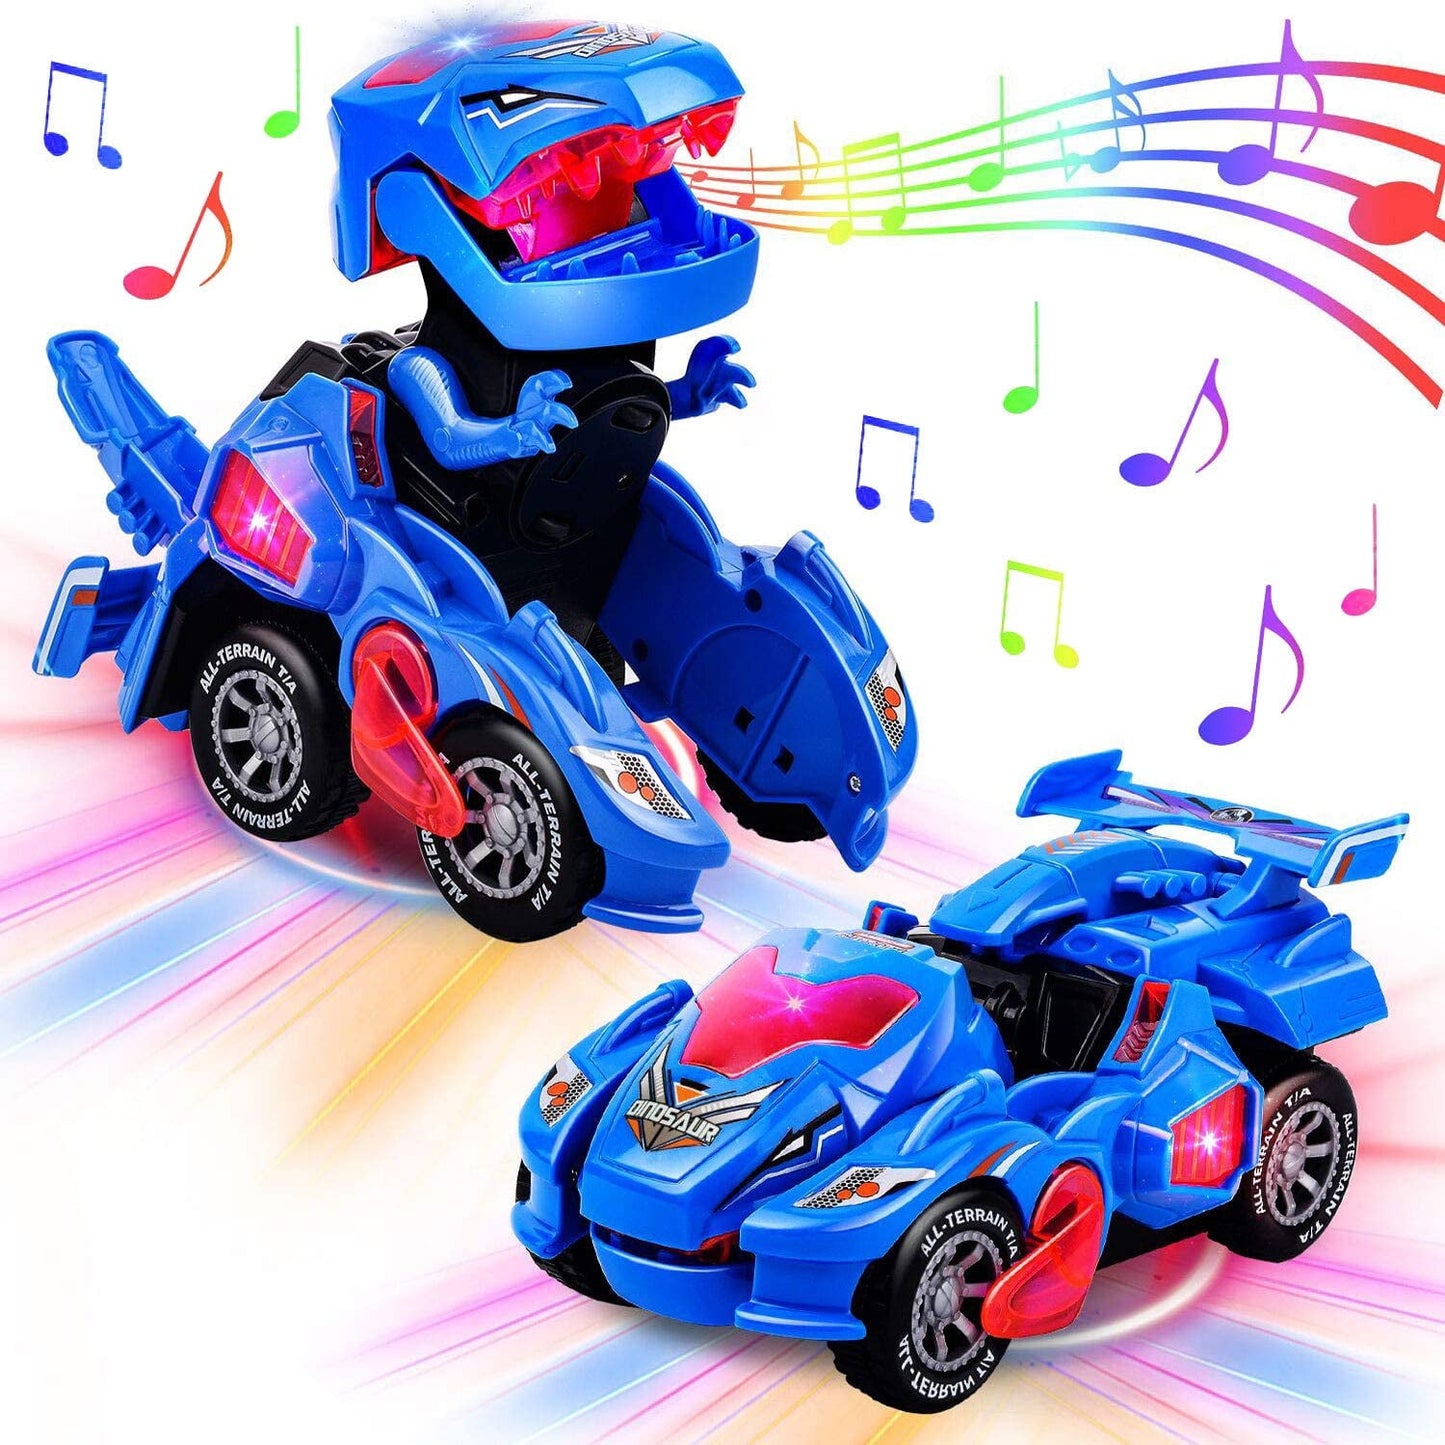 Transforming Dinosaur Car Toys,2 in 1 Automatic Dinosaur Transform Car Toy,Dinosaur Transformer Toy for Kids 3 Year Old and Up